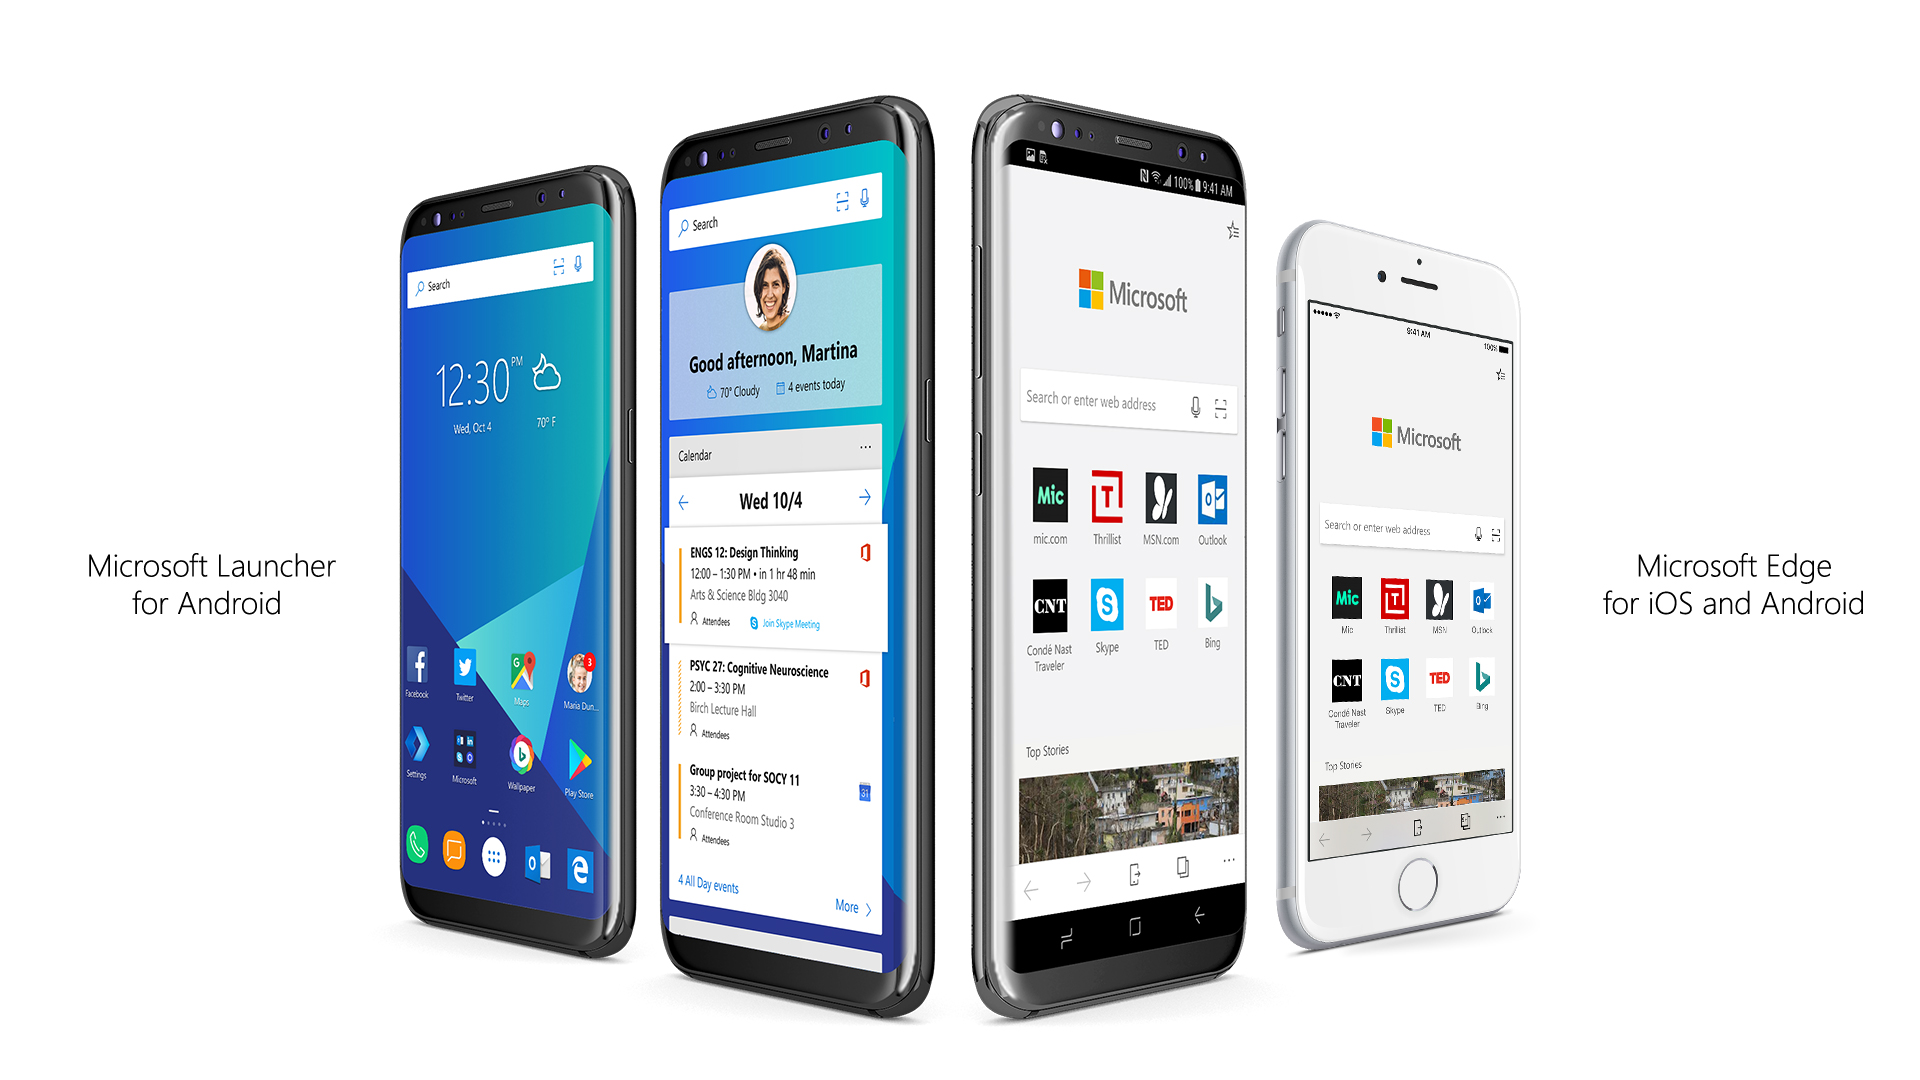 Announcing Microsoft Edge for iOS and Android, Microsoft Launcher